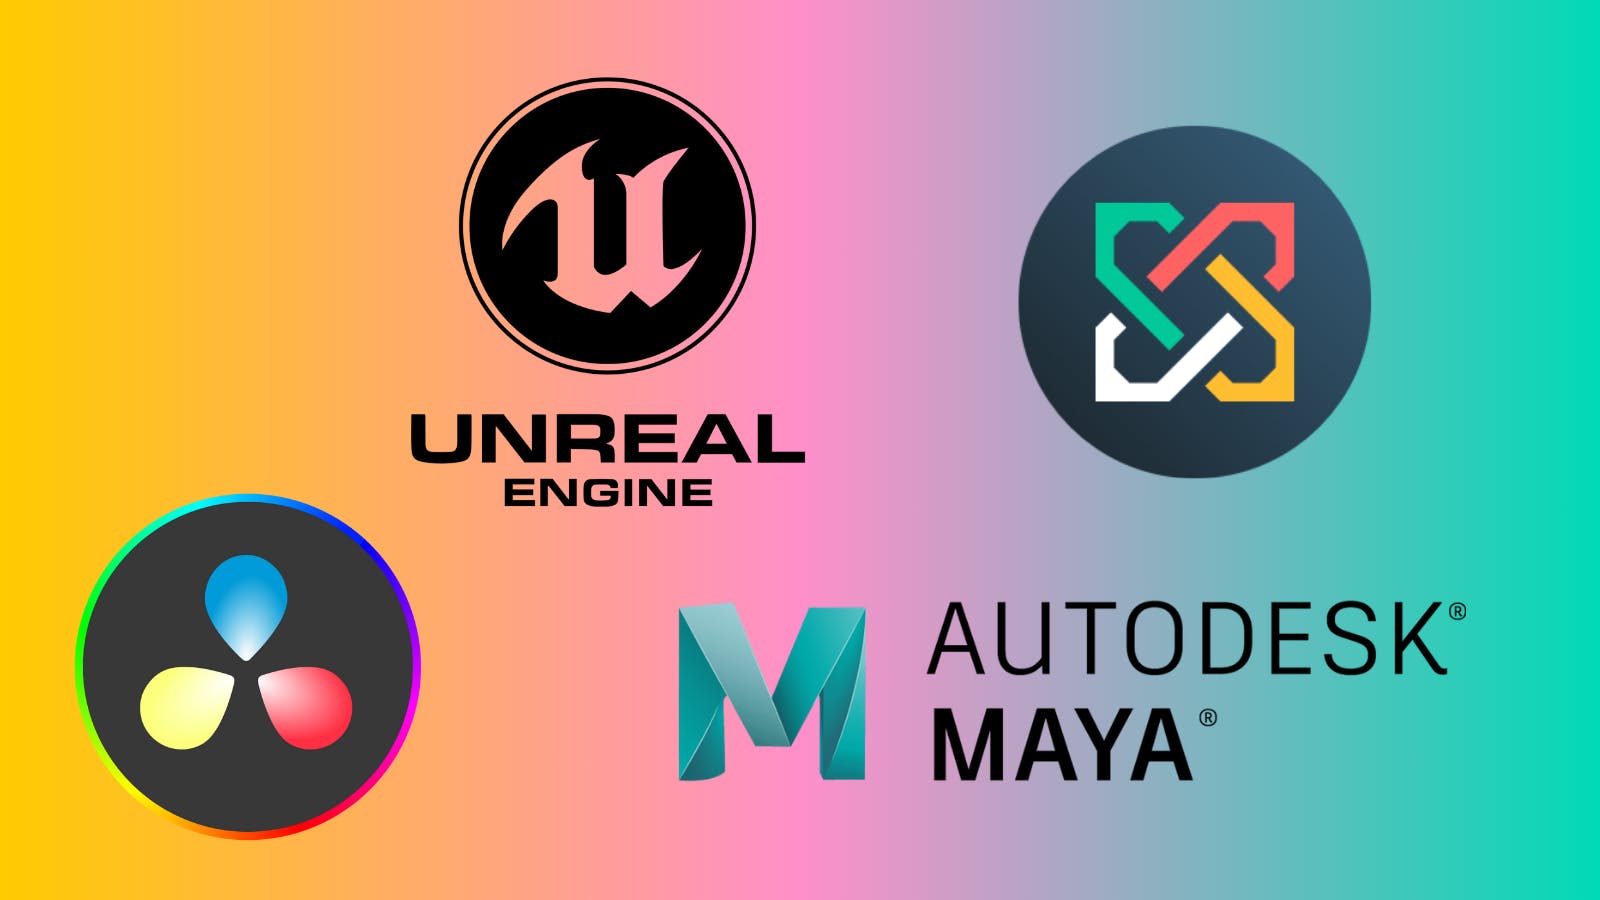 Logos of programmes mentioned (from left to right) - Davinci Resolve, Unreal Engine 5, Autodesk MAYA, Sync Sketch.